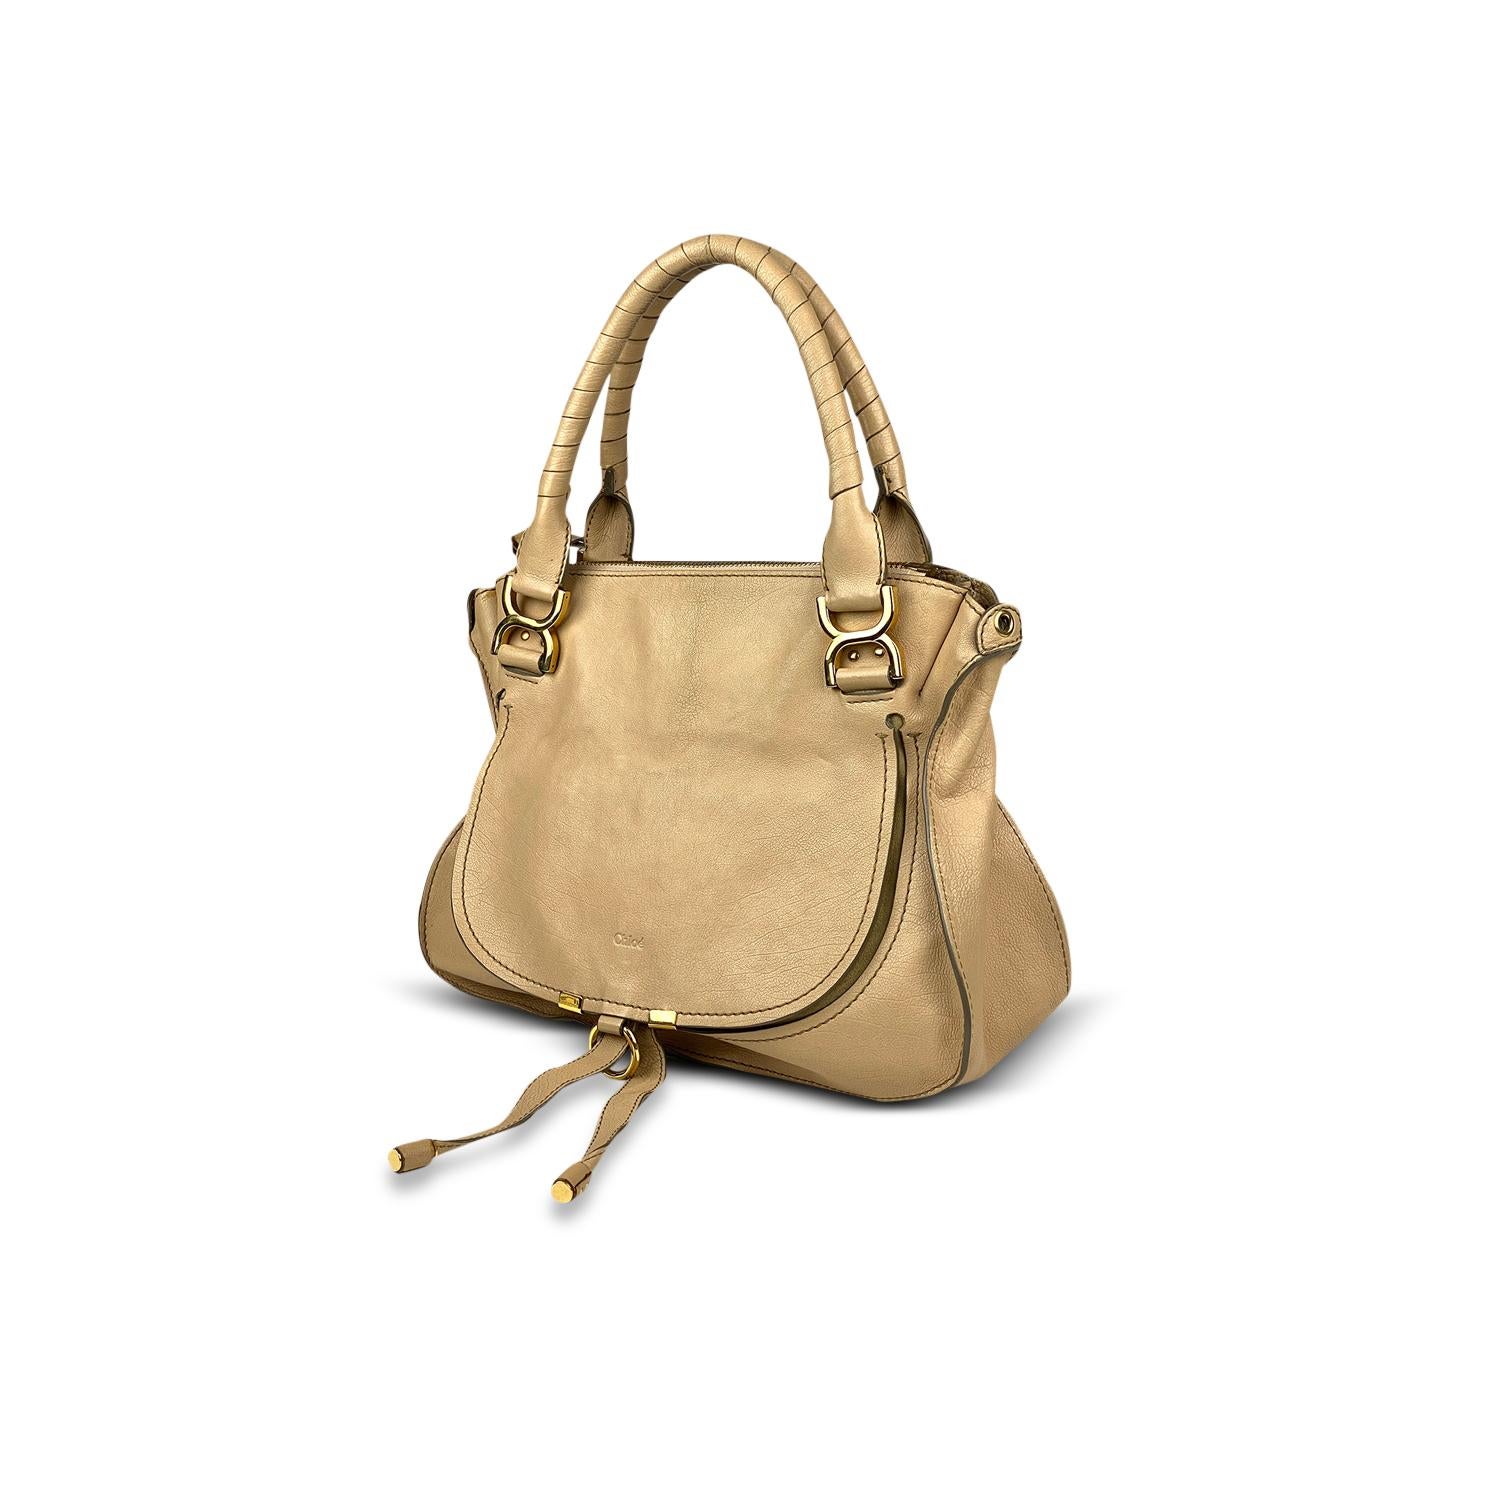 Beige leather Chloé Marcie shoulder bag with

- Gold-tone hardware
- Dual rolled top handles
- Contrast stitching throughout
- Single slit pocket at flap underside with pull-through closure, tonal interior lining, single zip pocket at interior wall,